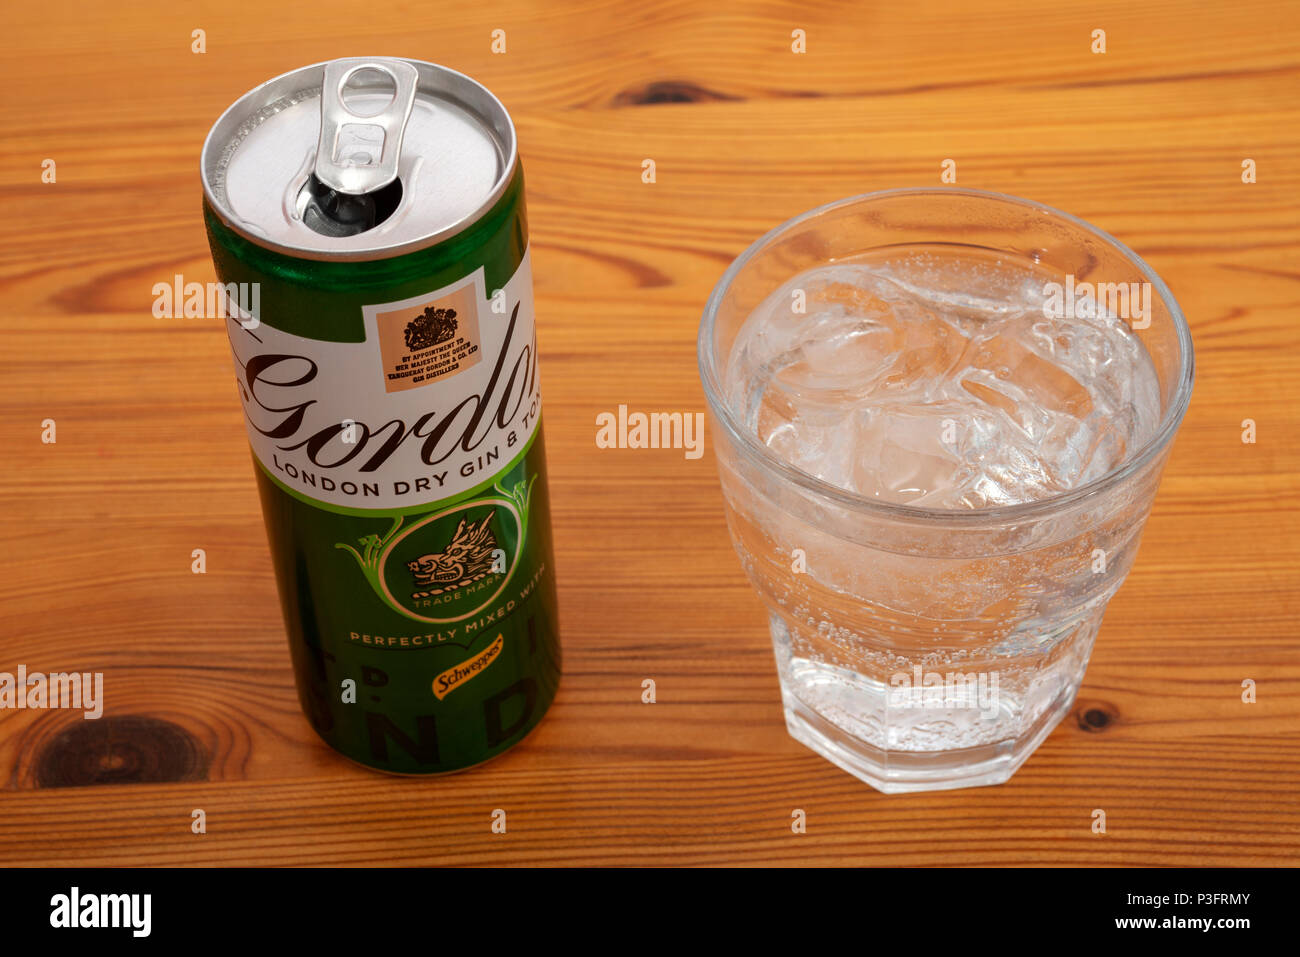 Gordons dry gin and tonic Stock Photo